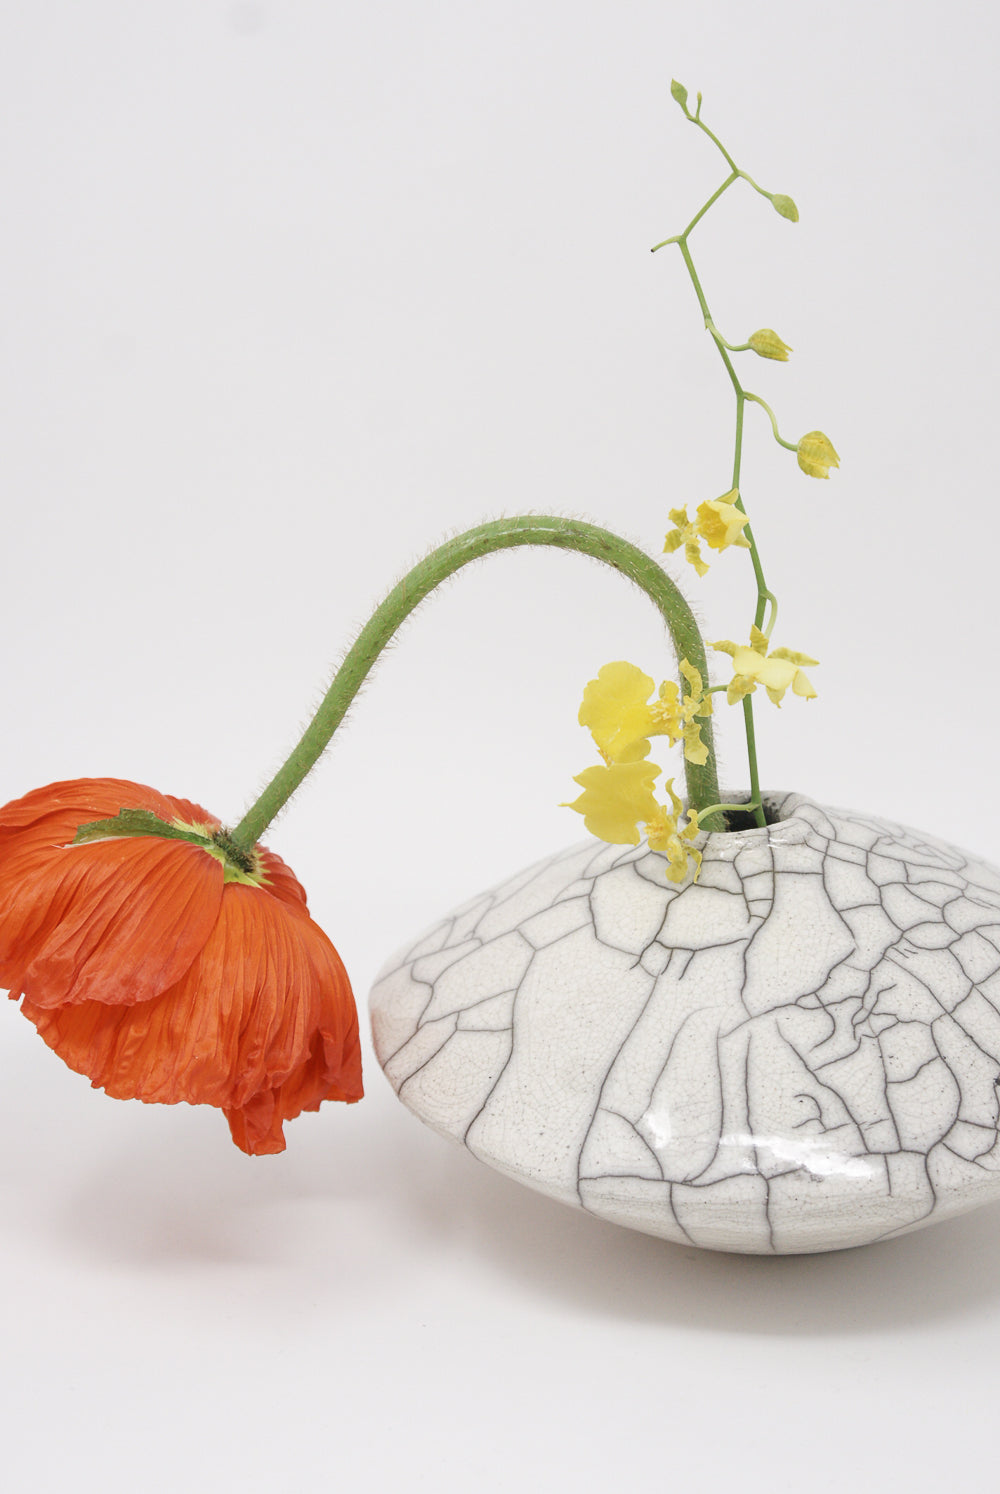 A drooping orange poppy and a stem of yellow flowers arranged in a MONDAYS Ikebana Vase in Raku-Fired Stoneware with a crackled surface.